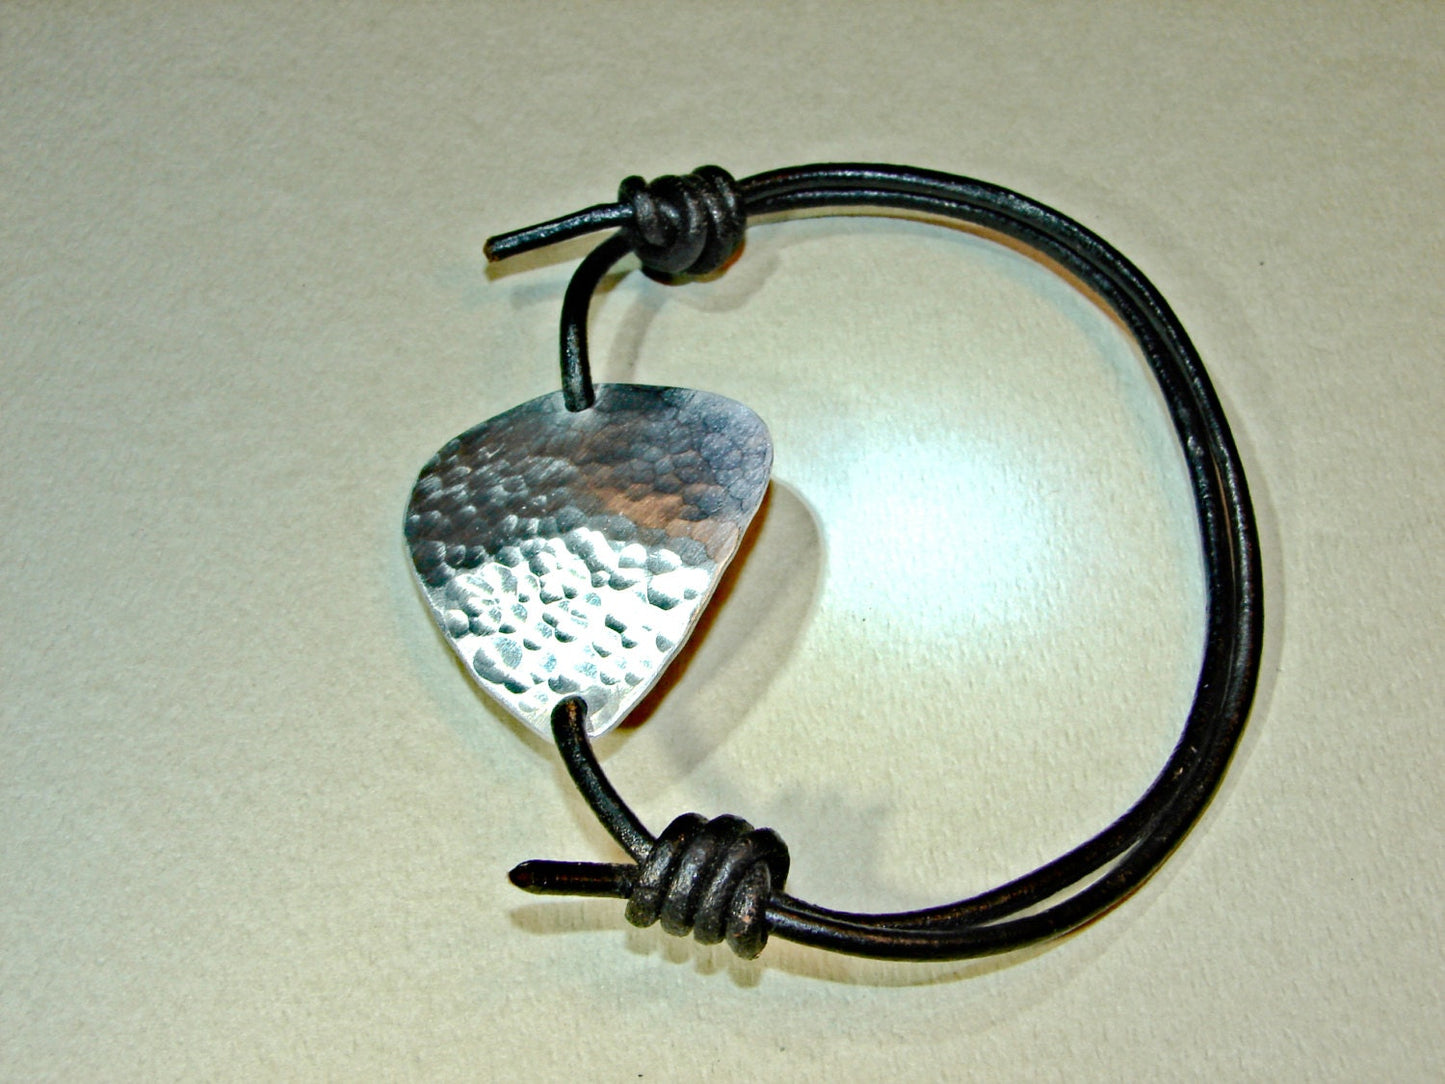 Hammered aluminum guitar pick on black leather cord